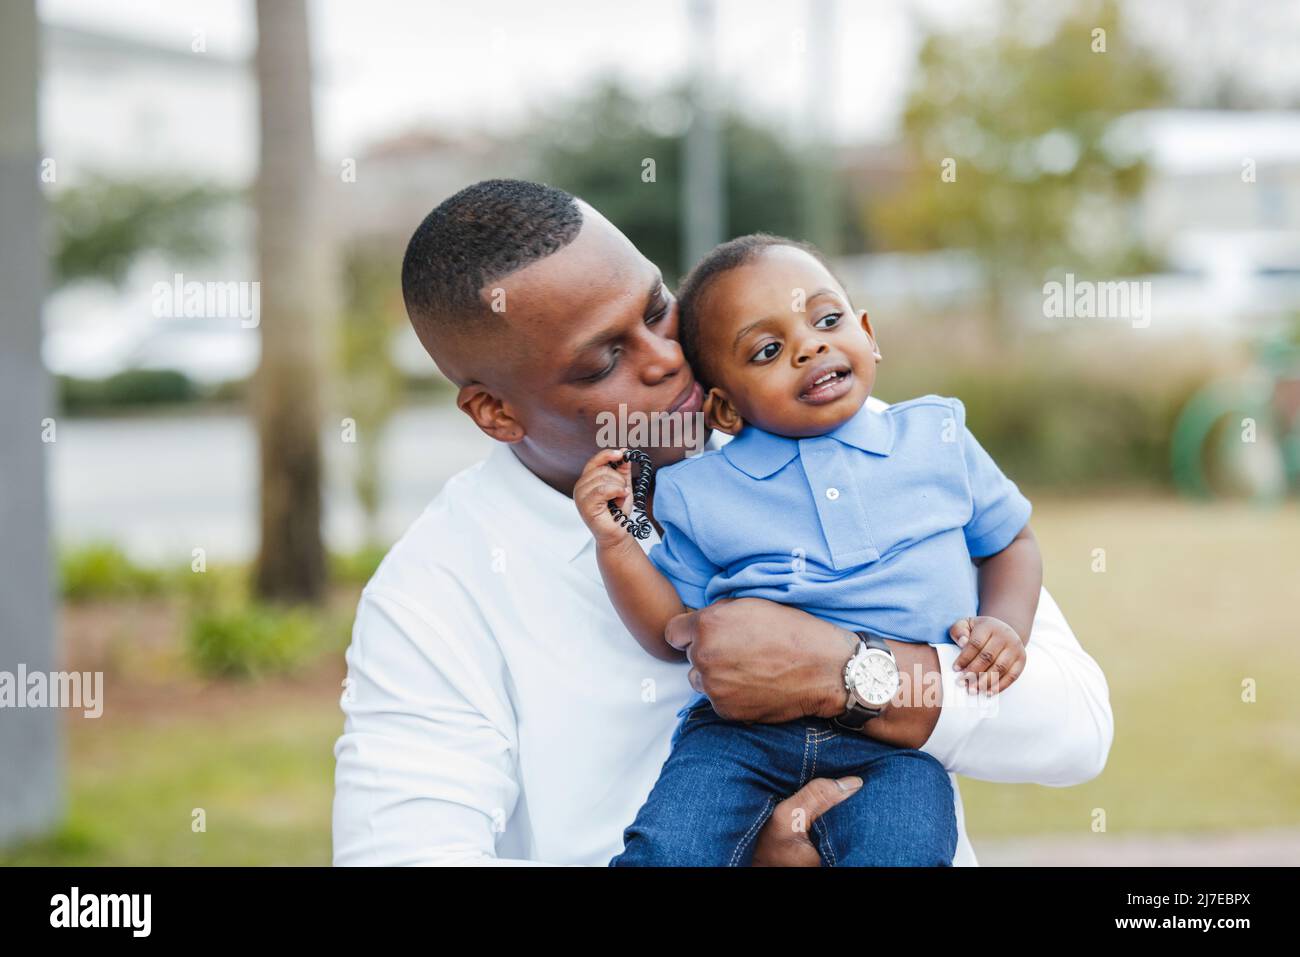 A dad holding his baby toddler boy and kissing him with affection on the cheek Stock Photo